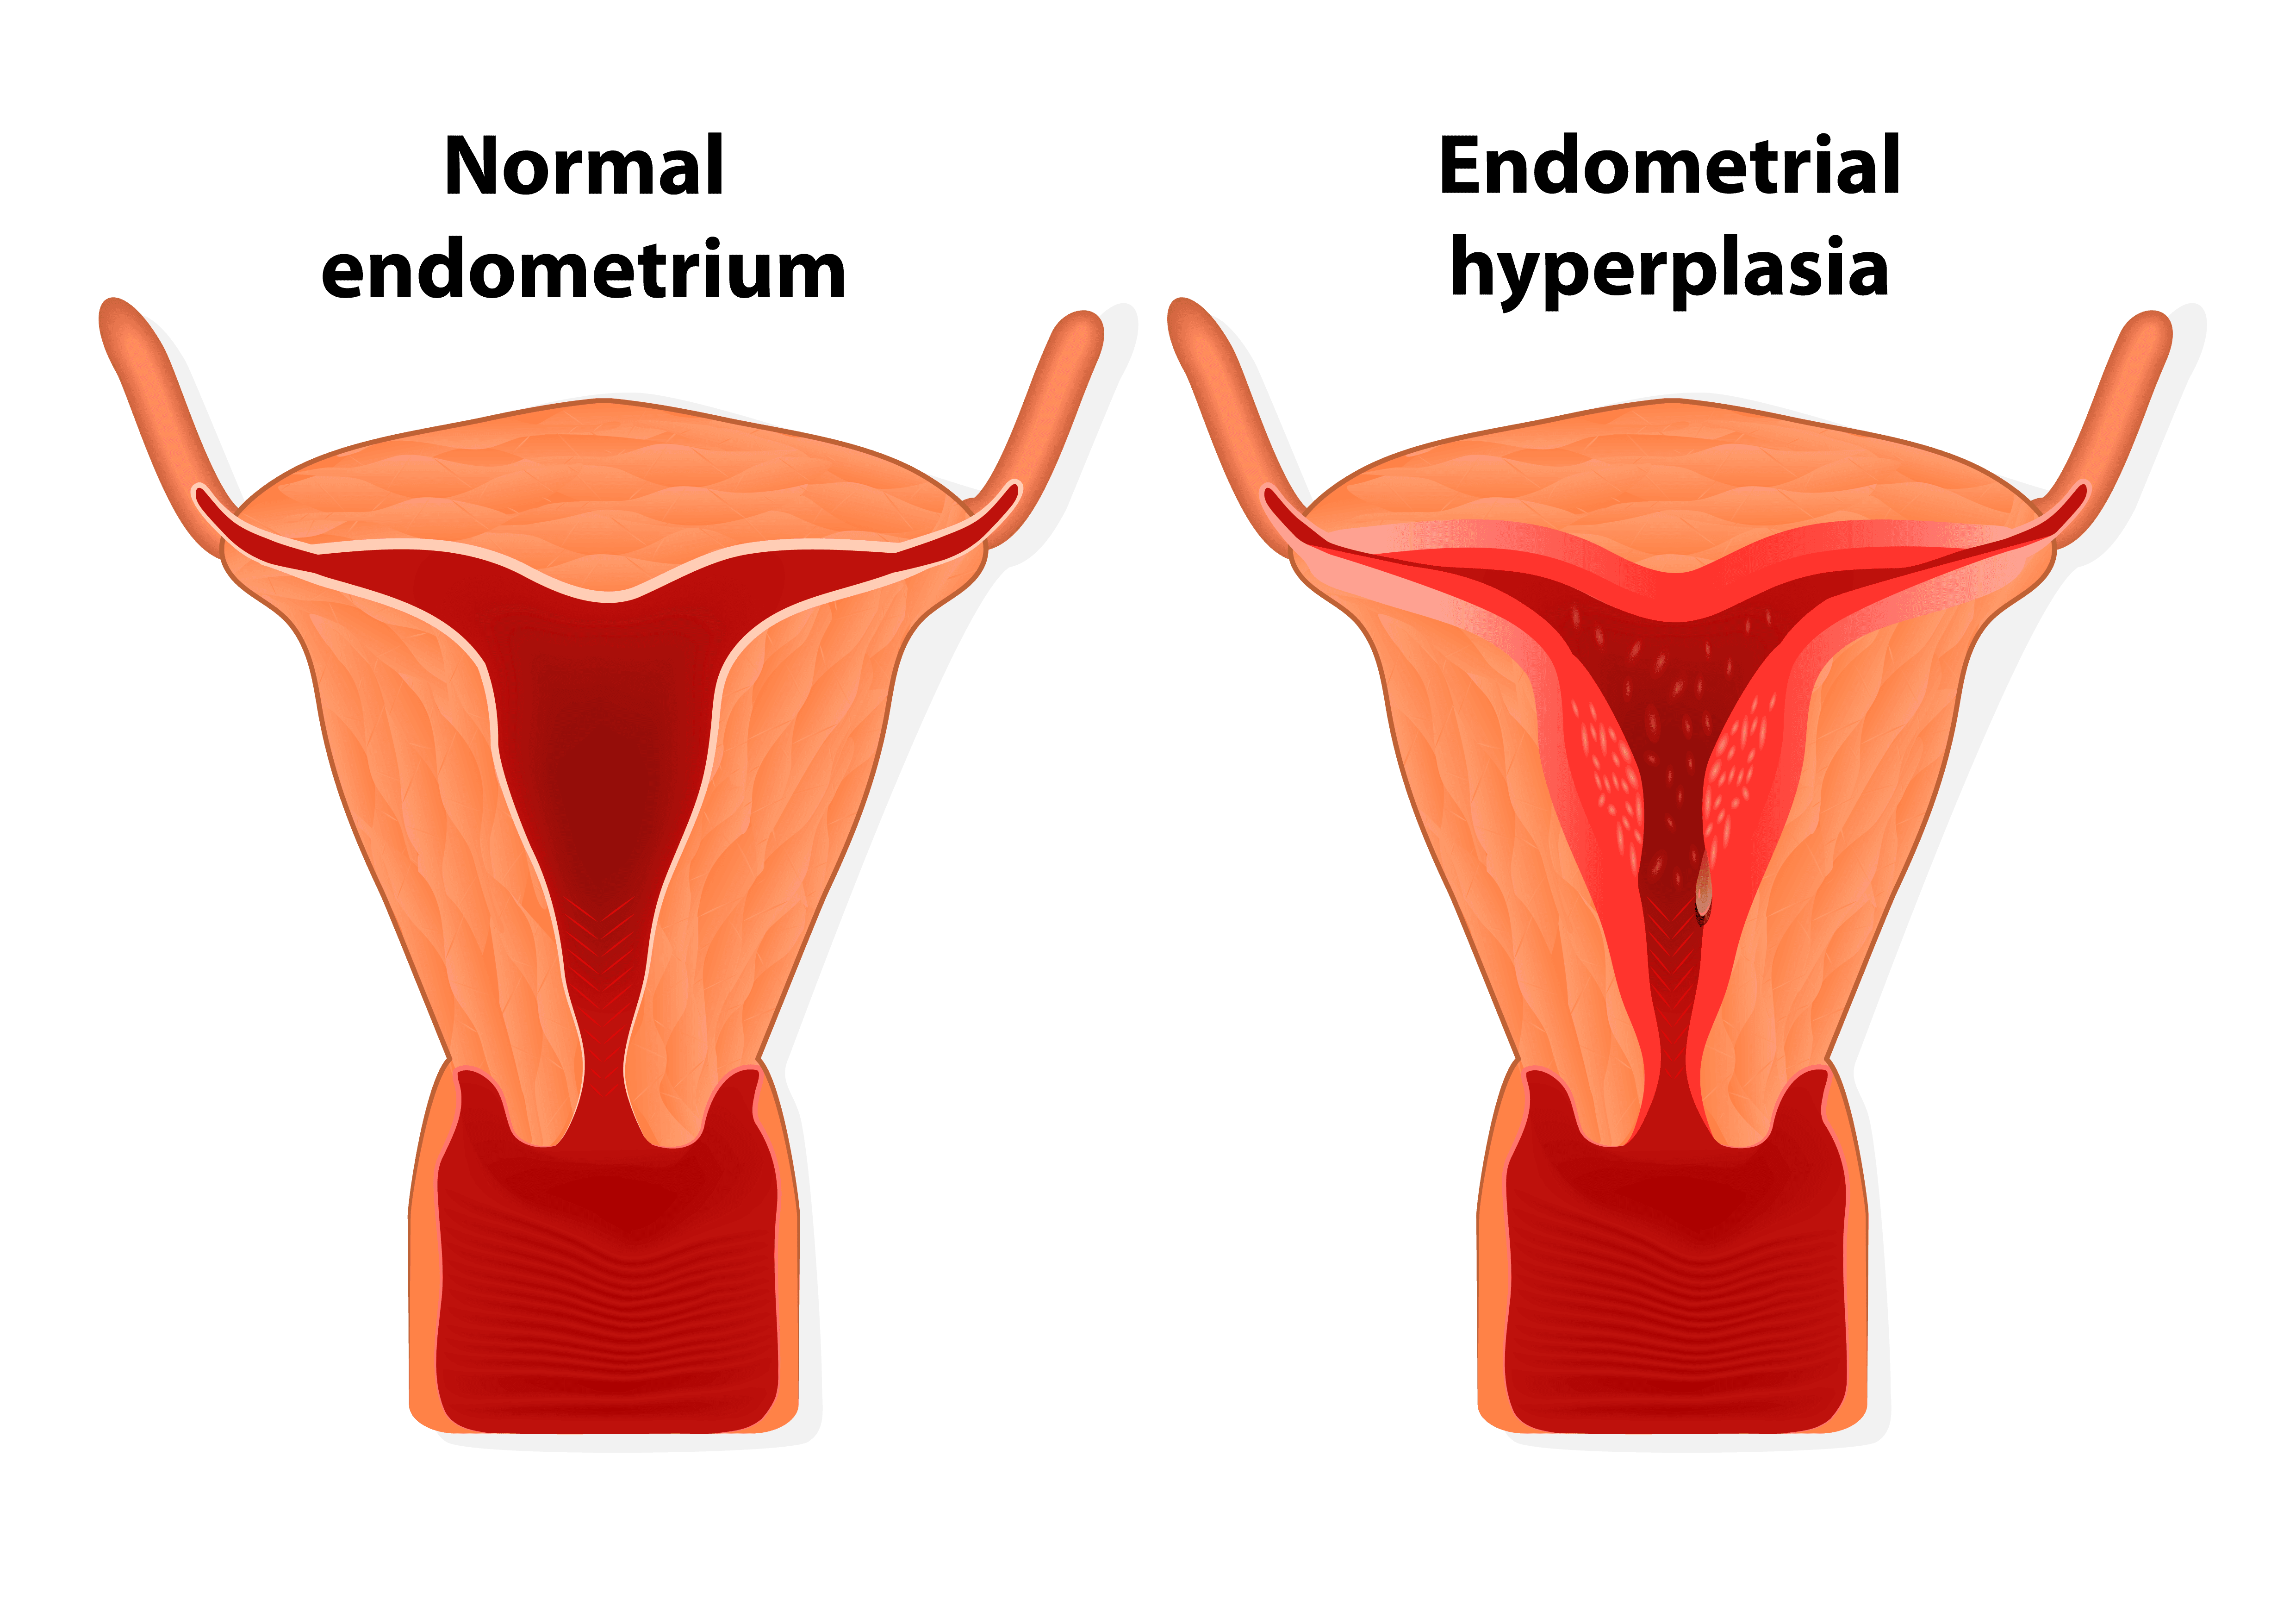 Image of Endometrial hyperplasia is an overgrowth of tissue in the endometrium uterus. The uterine lining becomes too thick which results in abnormal bleeding.